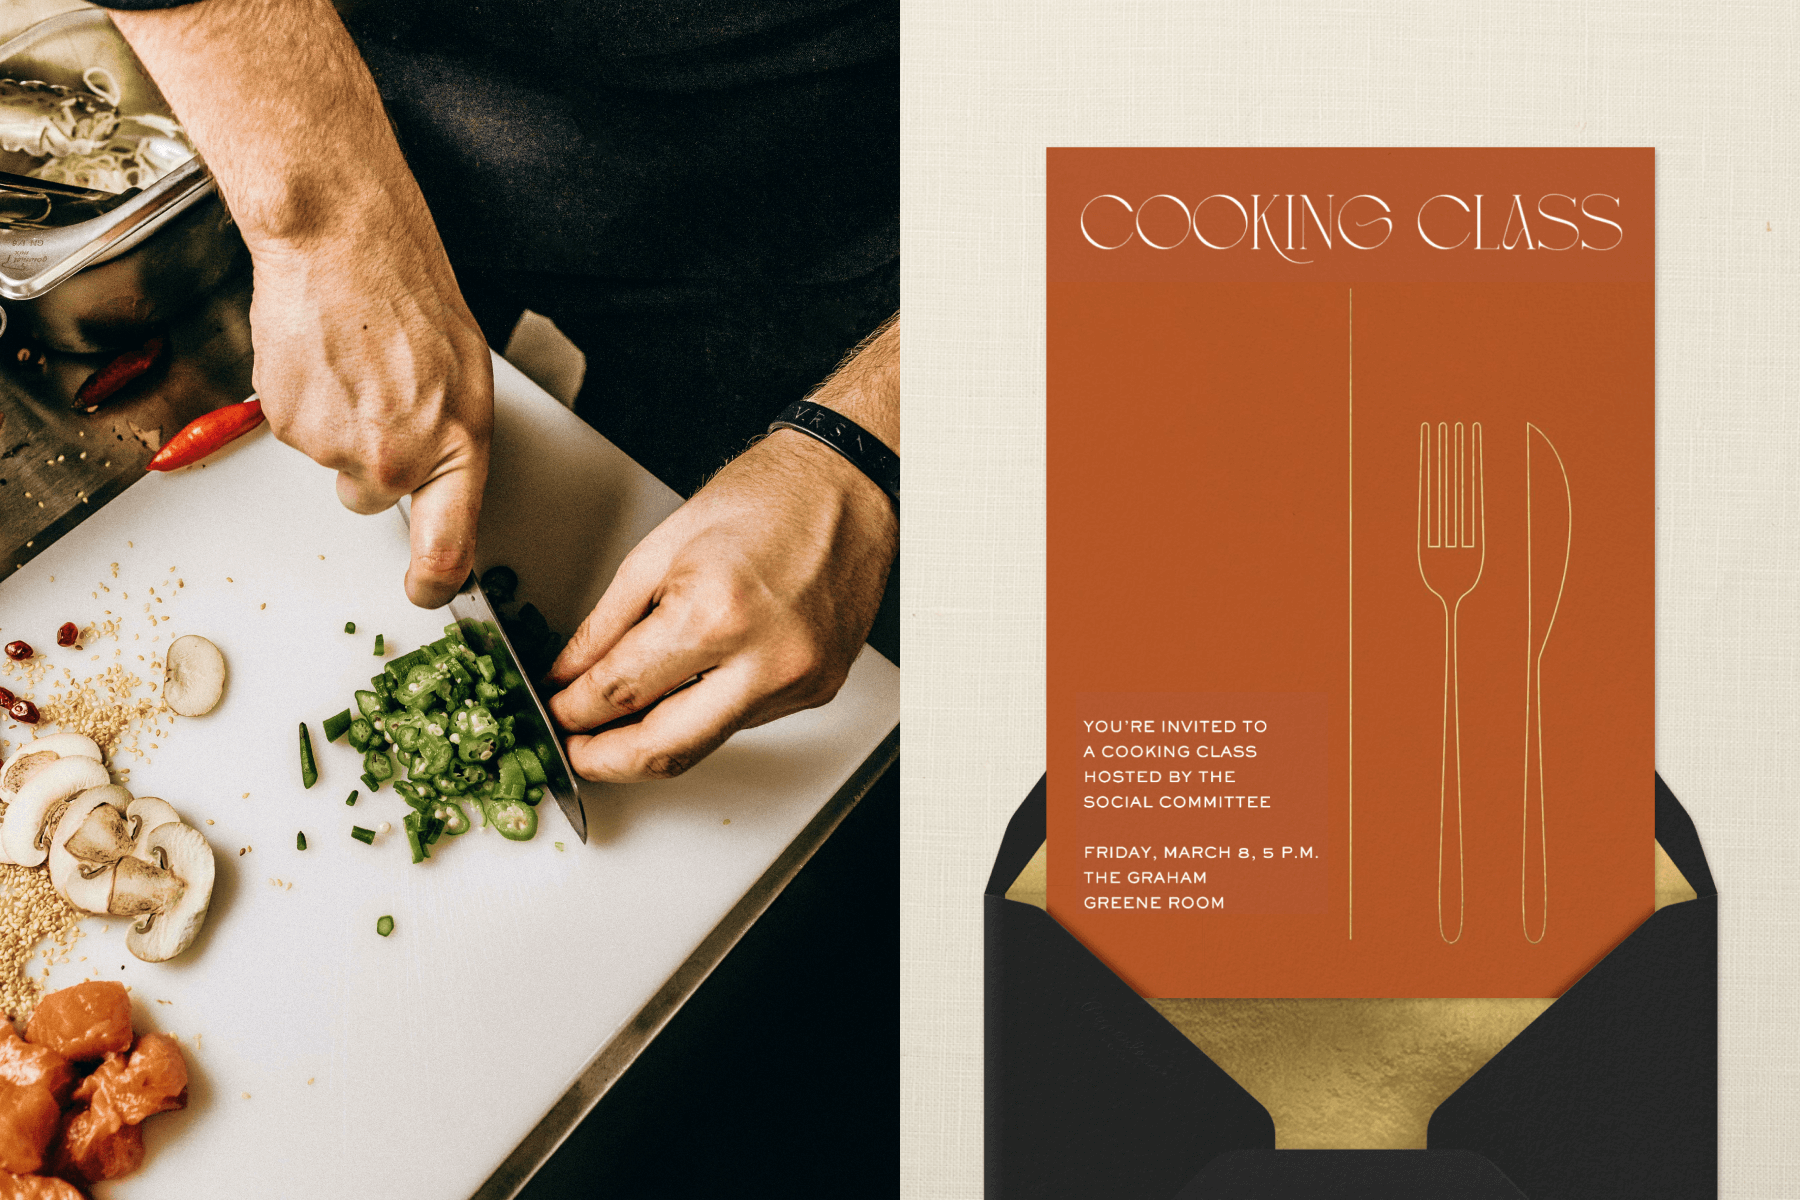 Left: Overhead view of hands chopping a jalapeno; Right: An orange cooking class invitation.